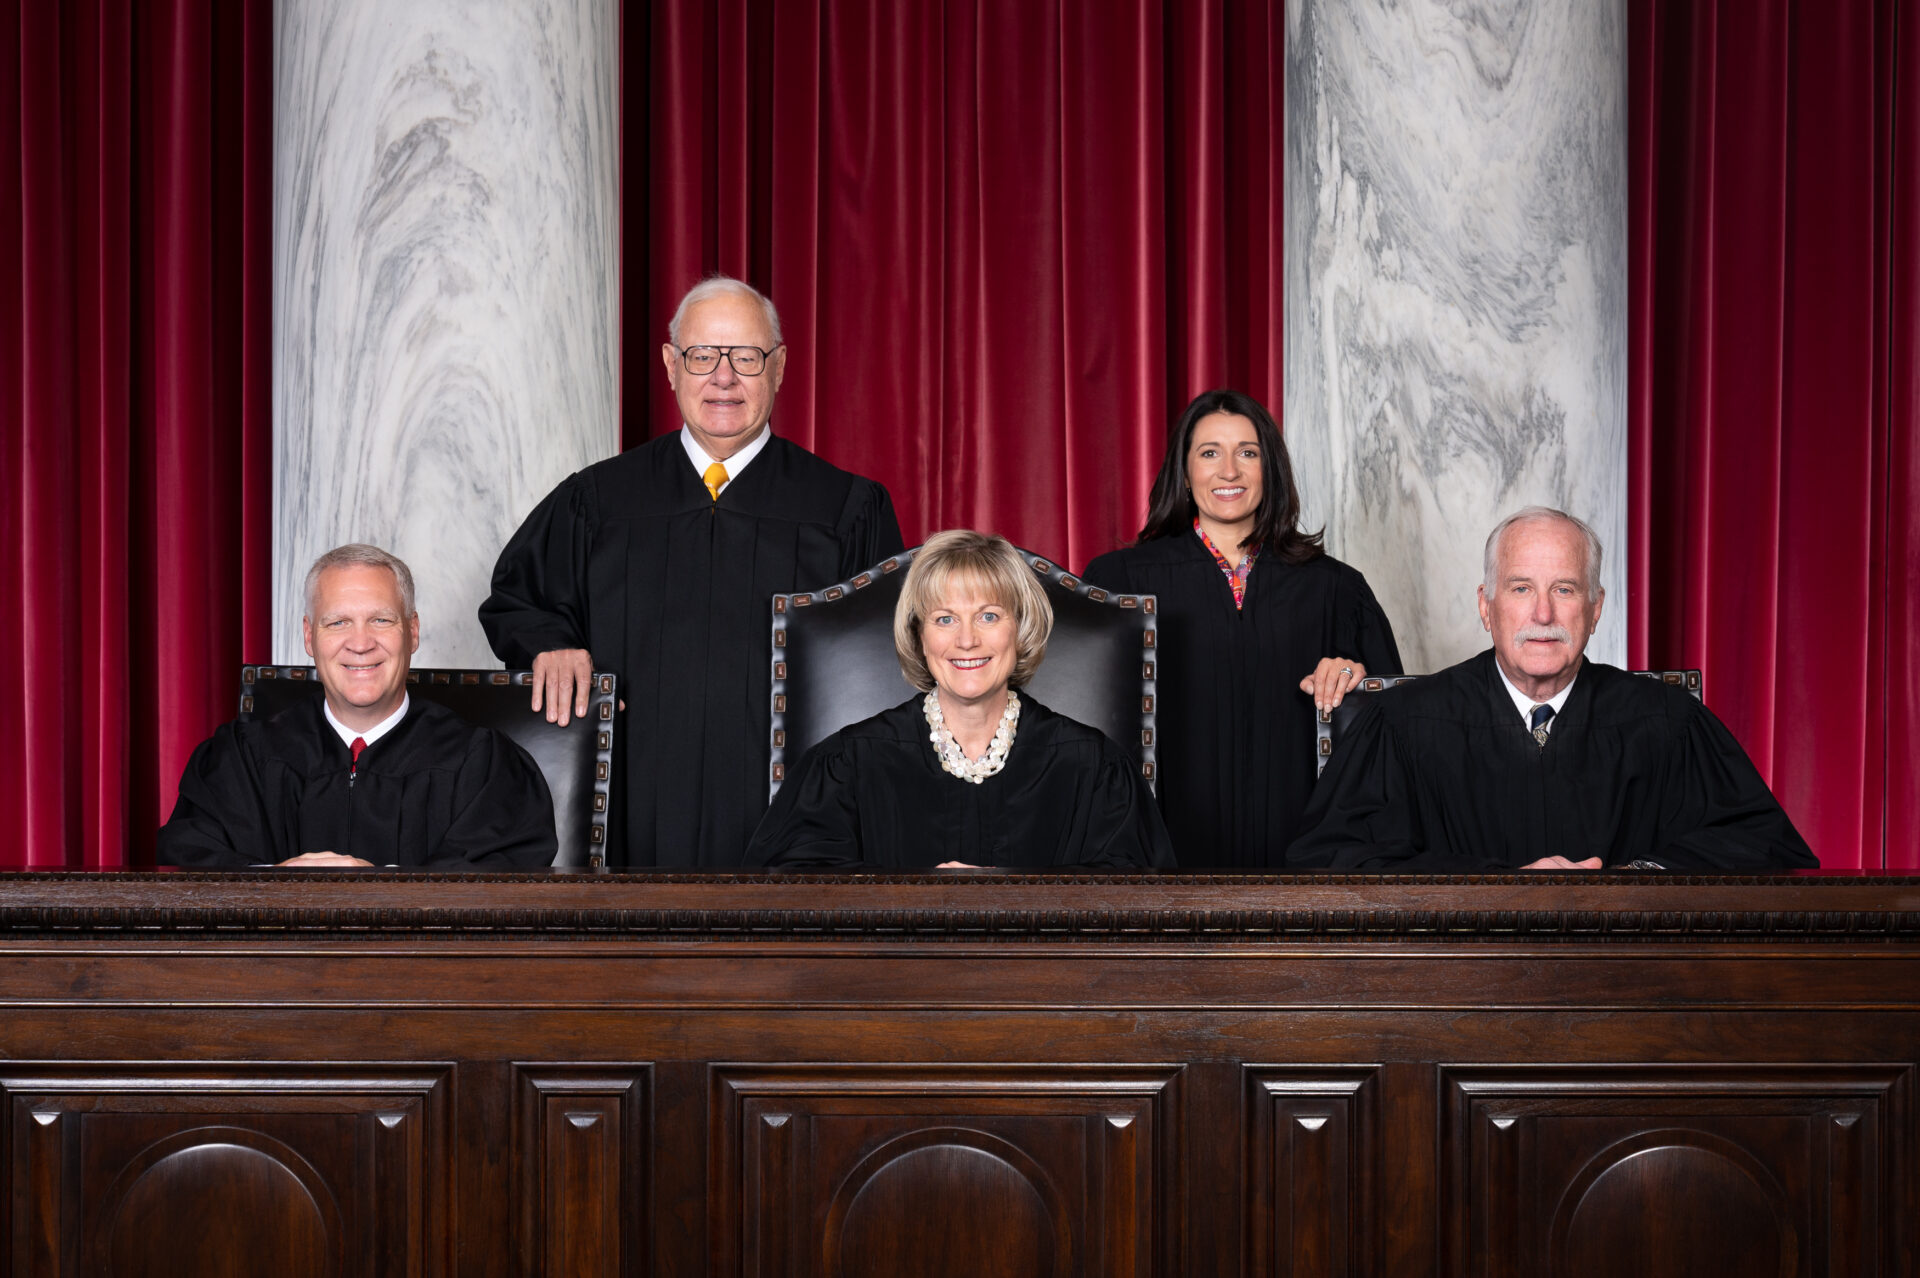 Outgoing Justice Hutchison On Current W.Va. Judicial System